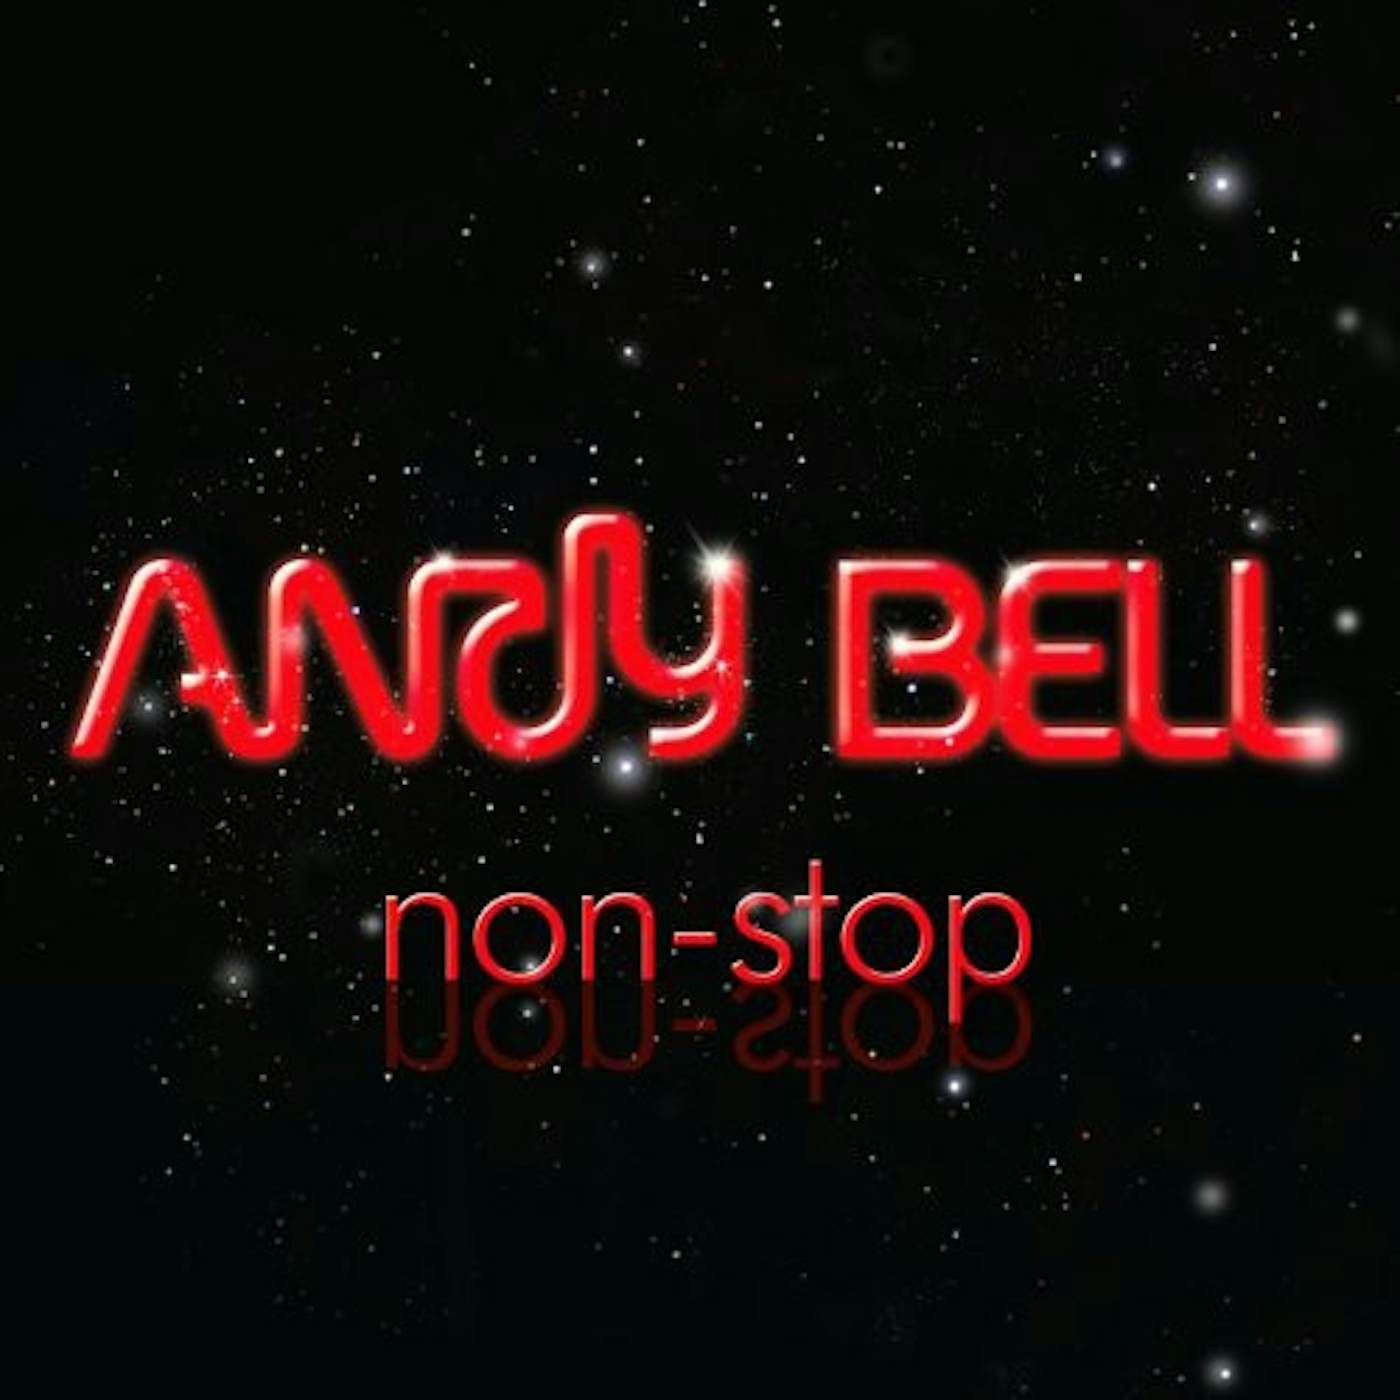 Andy Bell NON-STOP CD